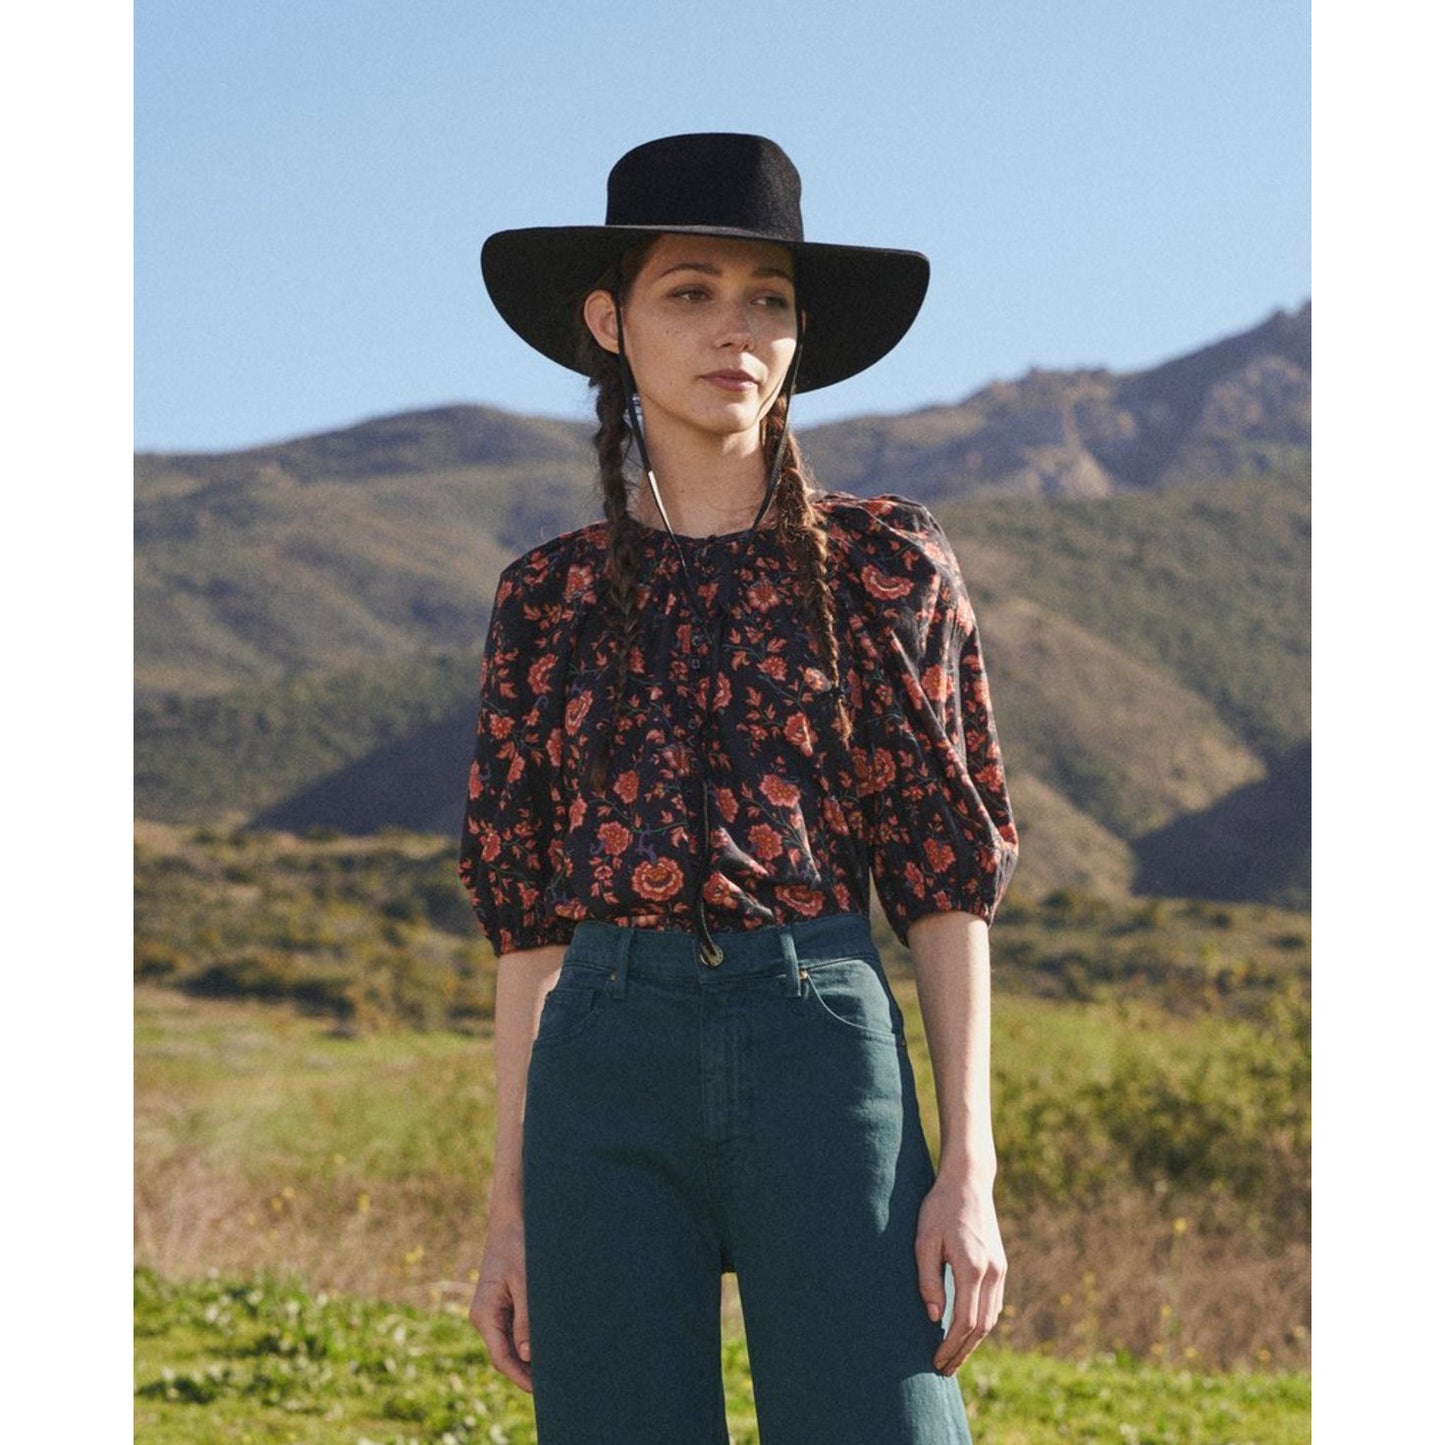 The Great The Ravine Blouse Top